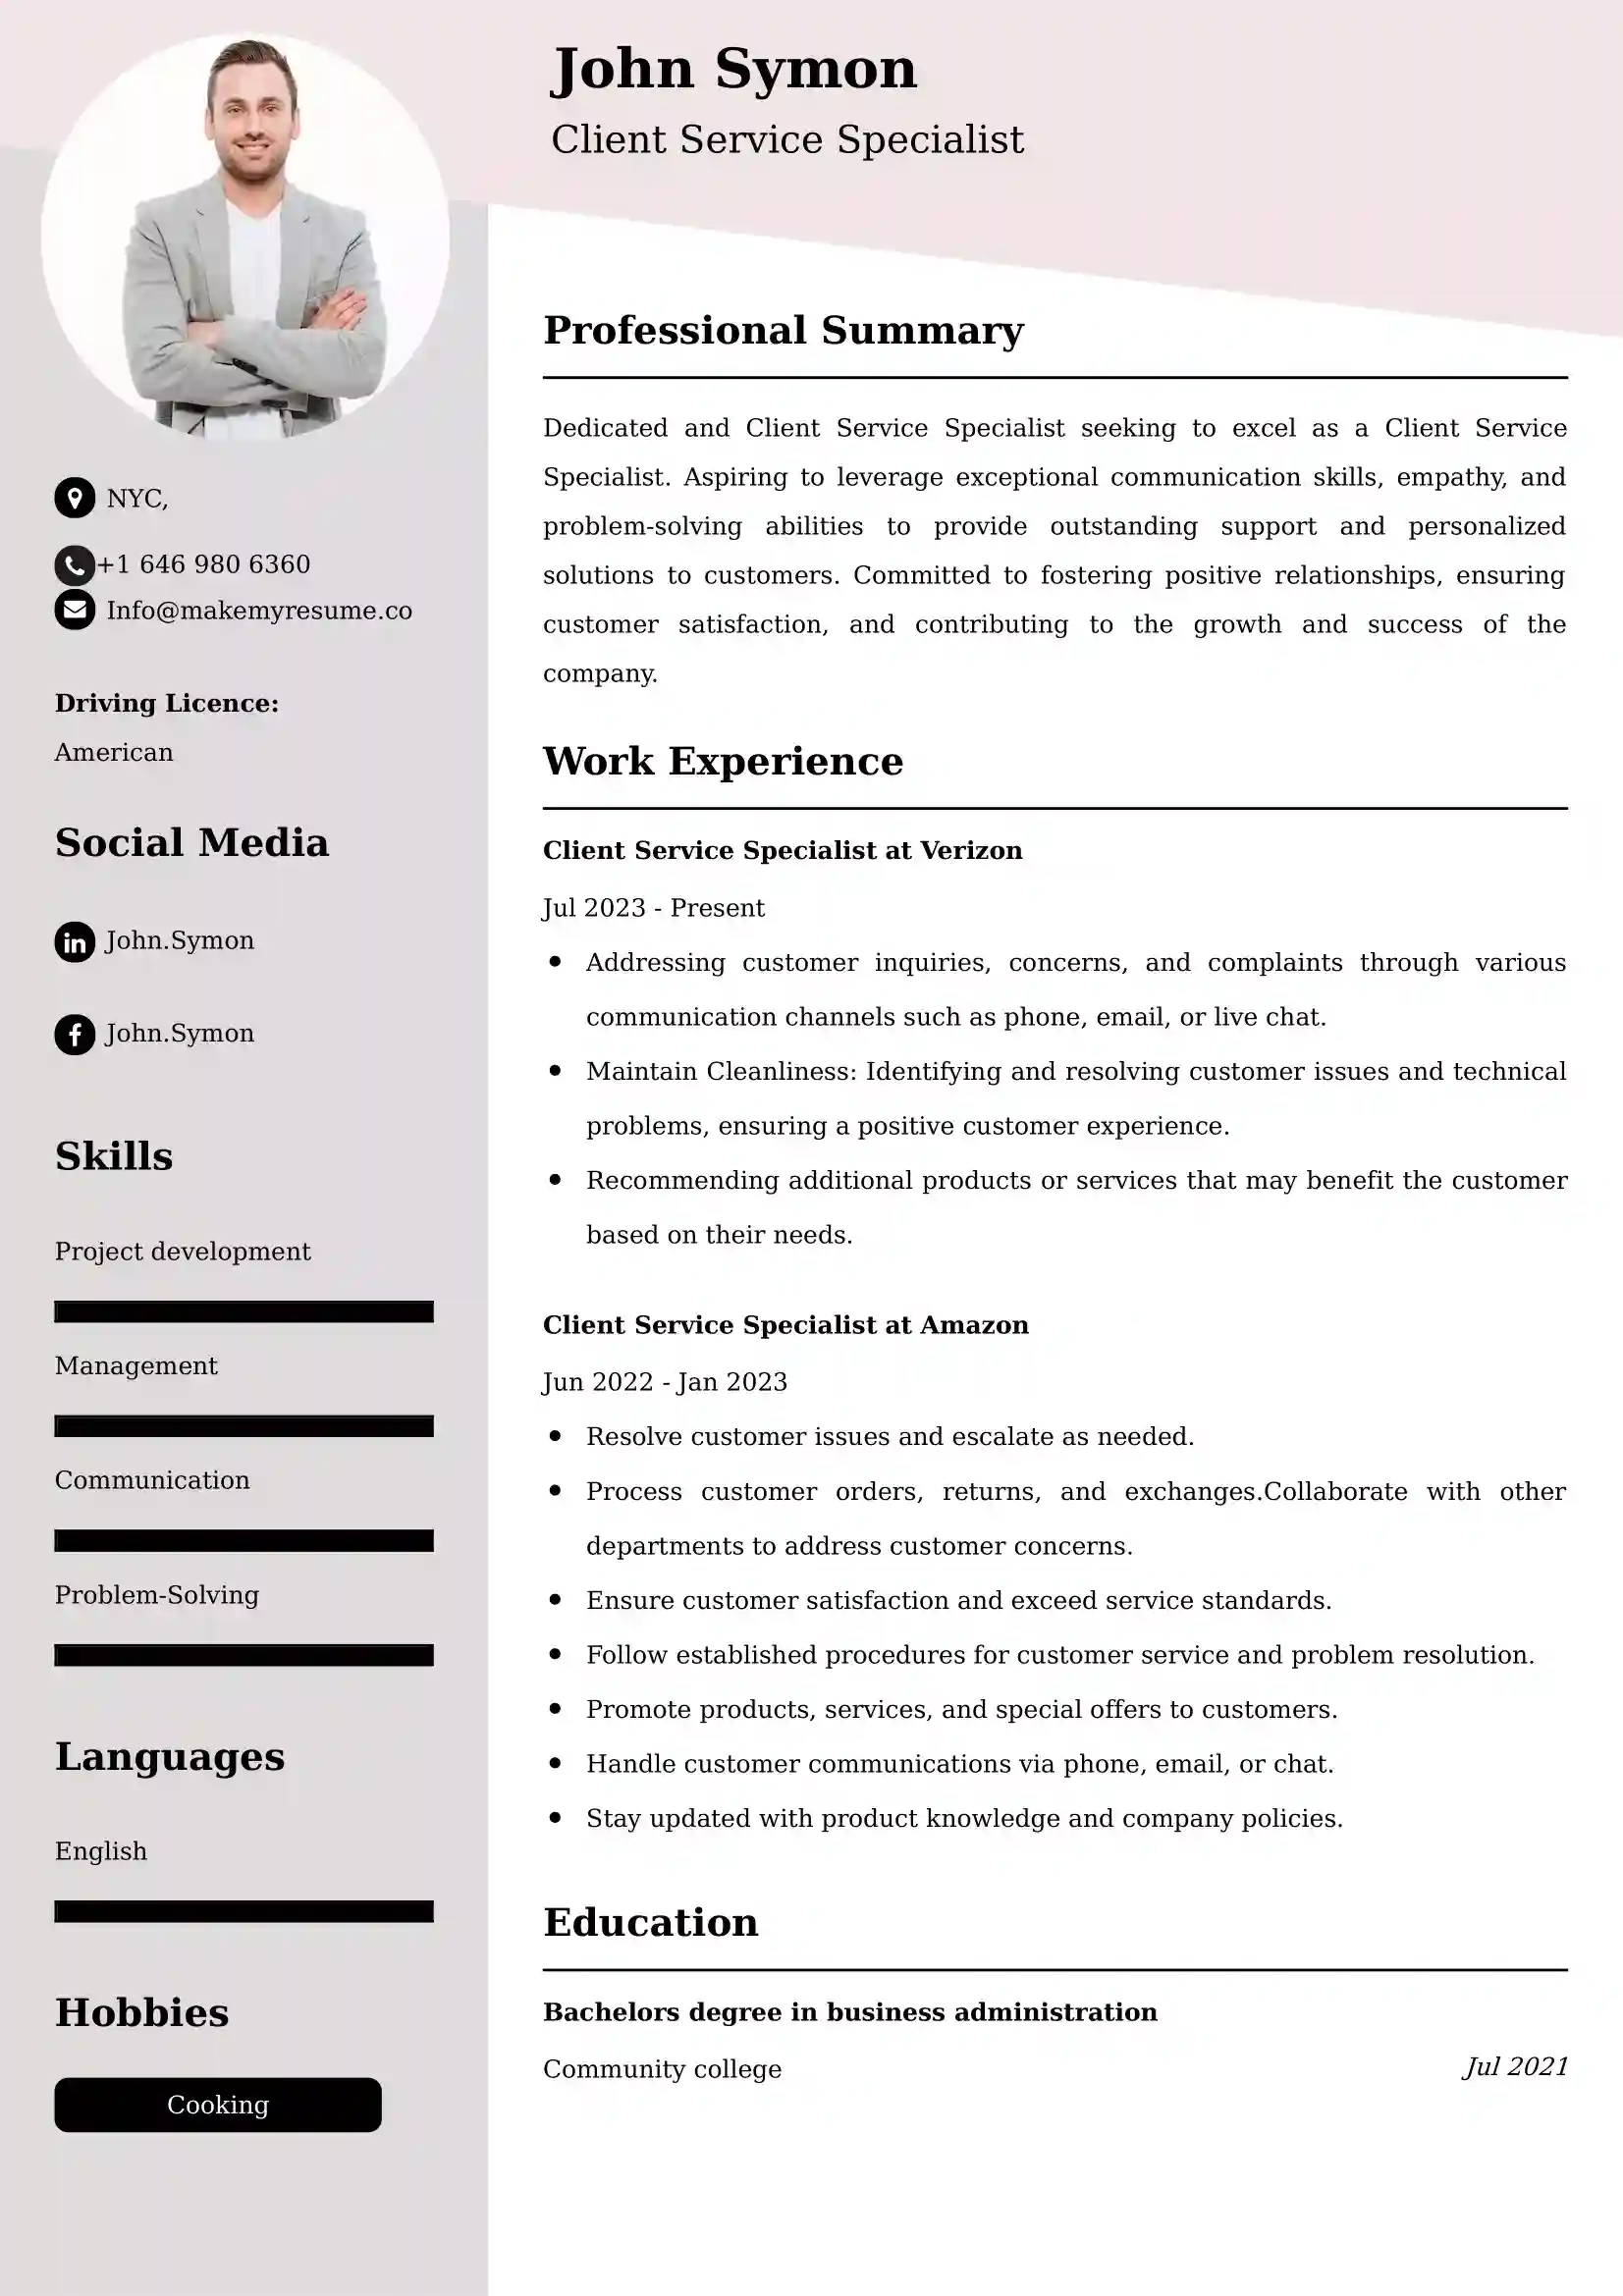 Client Service Specialist Resume Examples - UK Format, Latest Template.